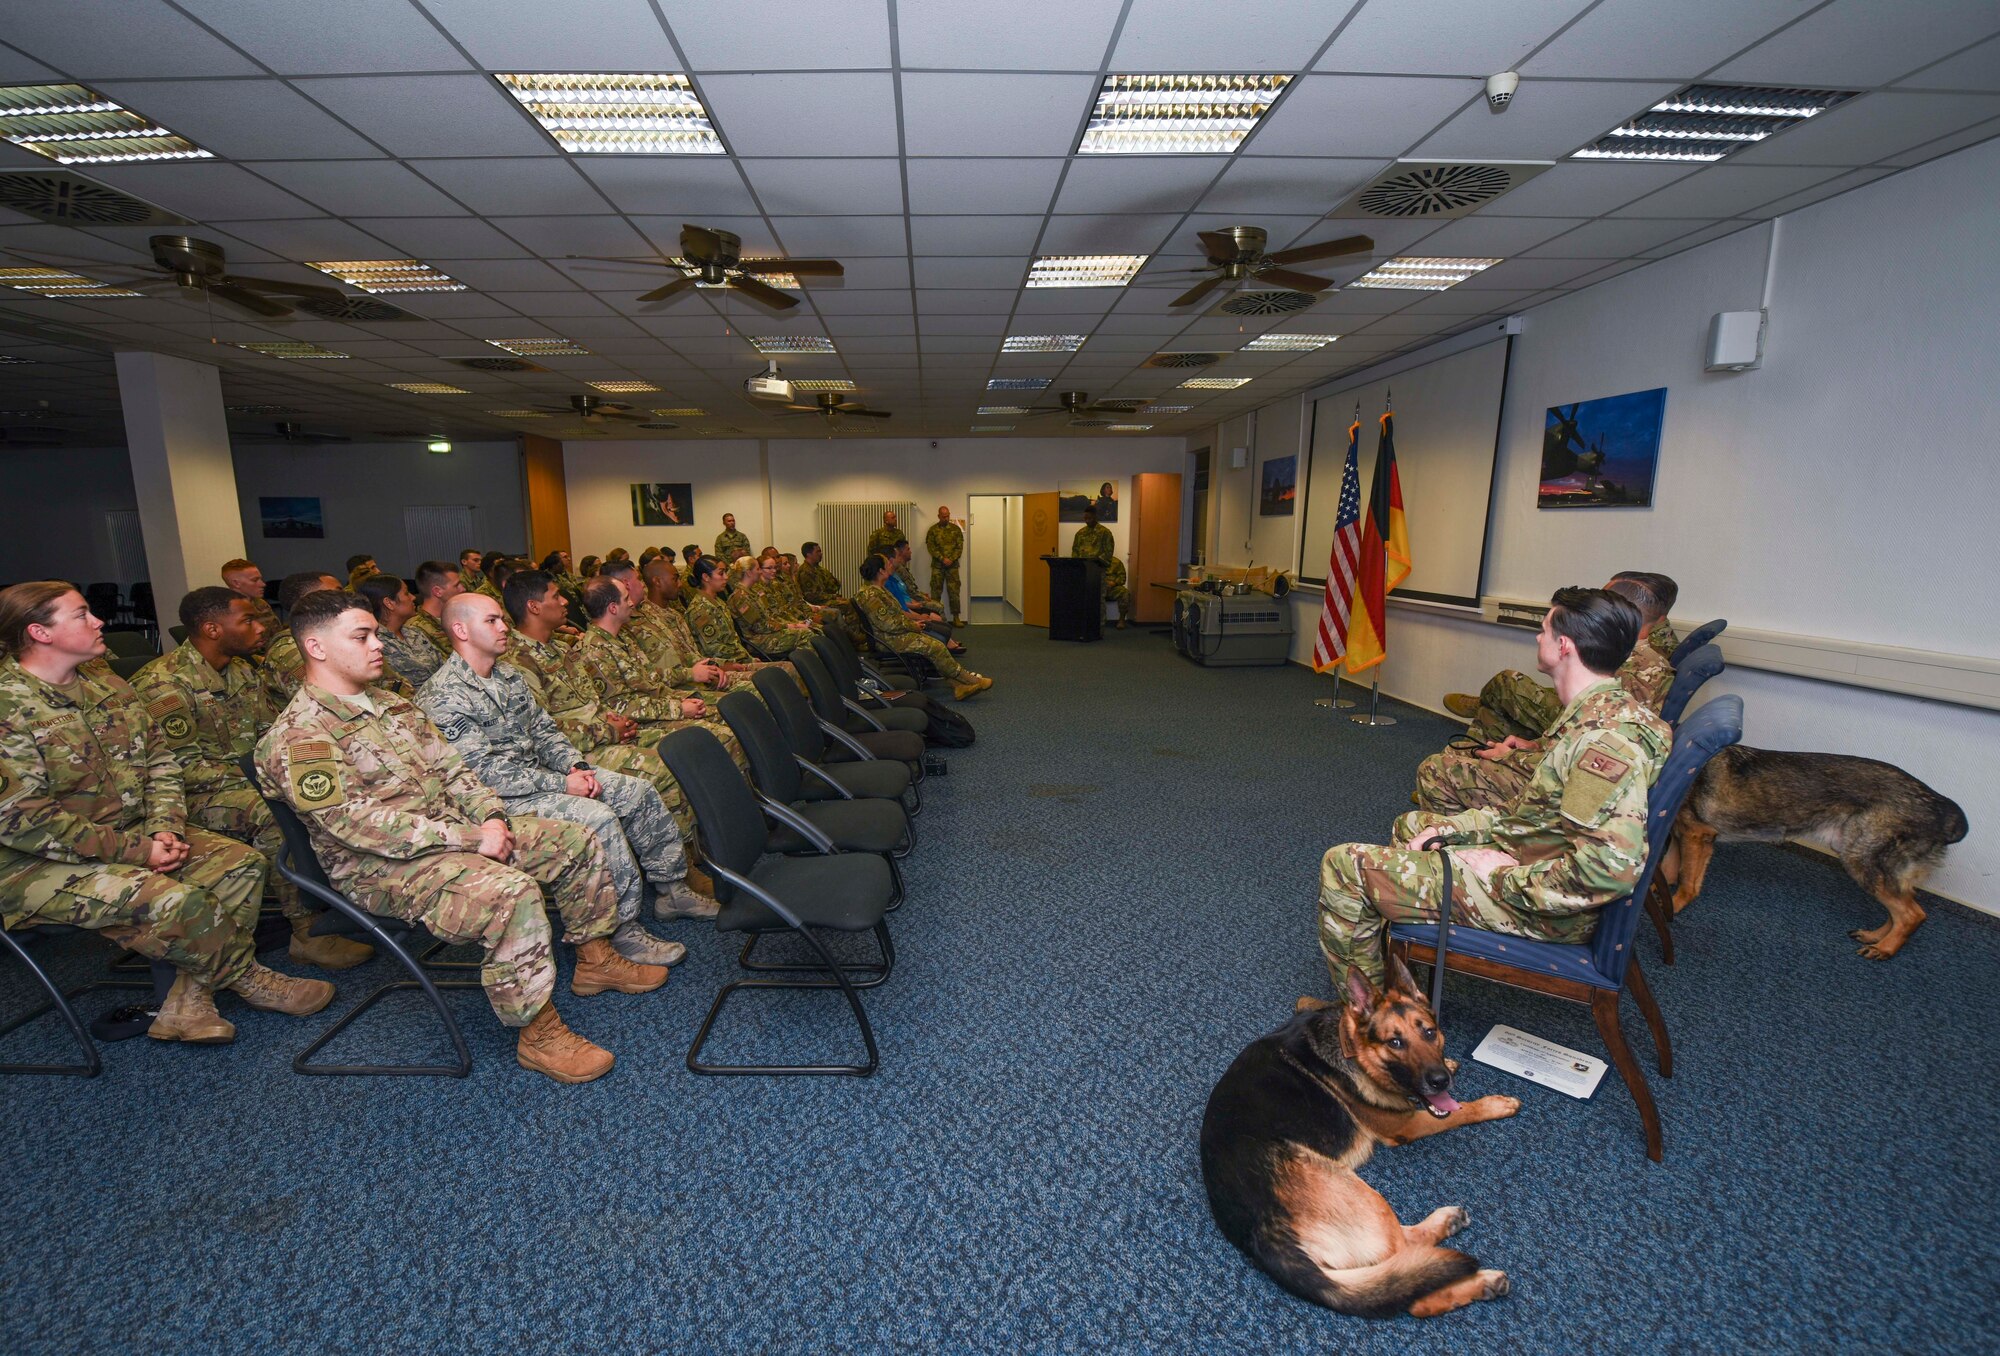 Charone and Vulcan, 86th Security Forces Squadron military working dogs, relax with their handlers during a presentation at their retirement ceremony at Ramstein Air Base, Germany, May 18, 2019. Charone and Vulcan will both retire due to health issues, and will continue to the homes of their handlers, U.S. Tech. Sgt. Chad Coe, and Senior Airman Jonathan Engle, 86th SFS.